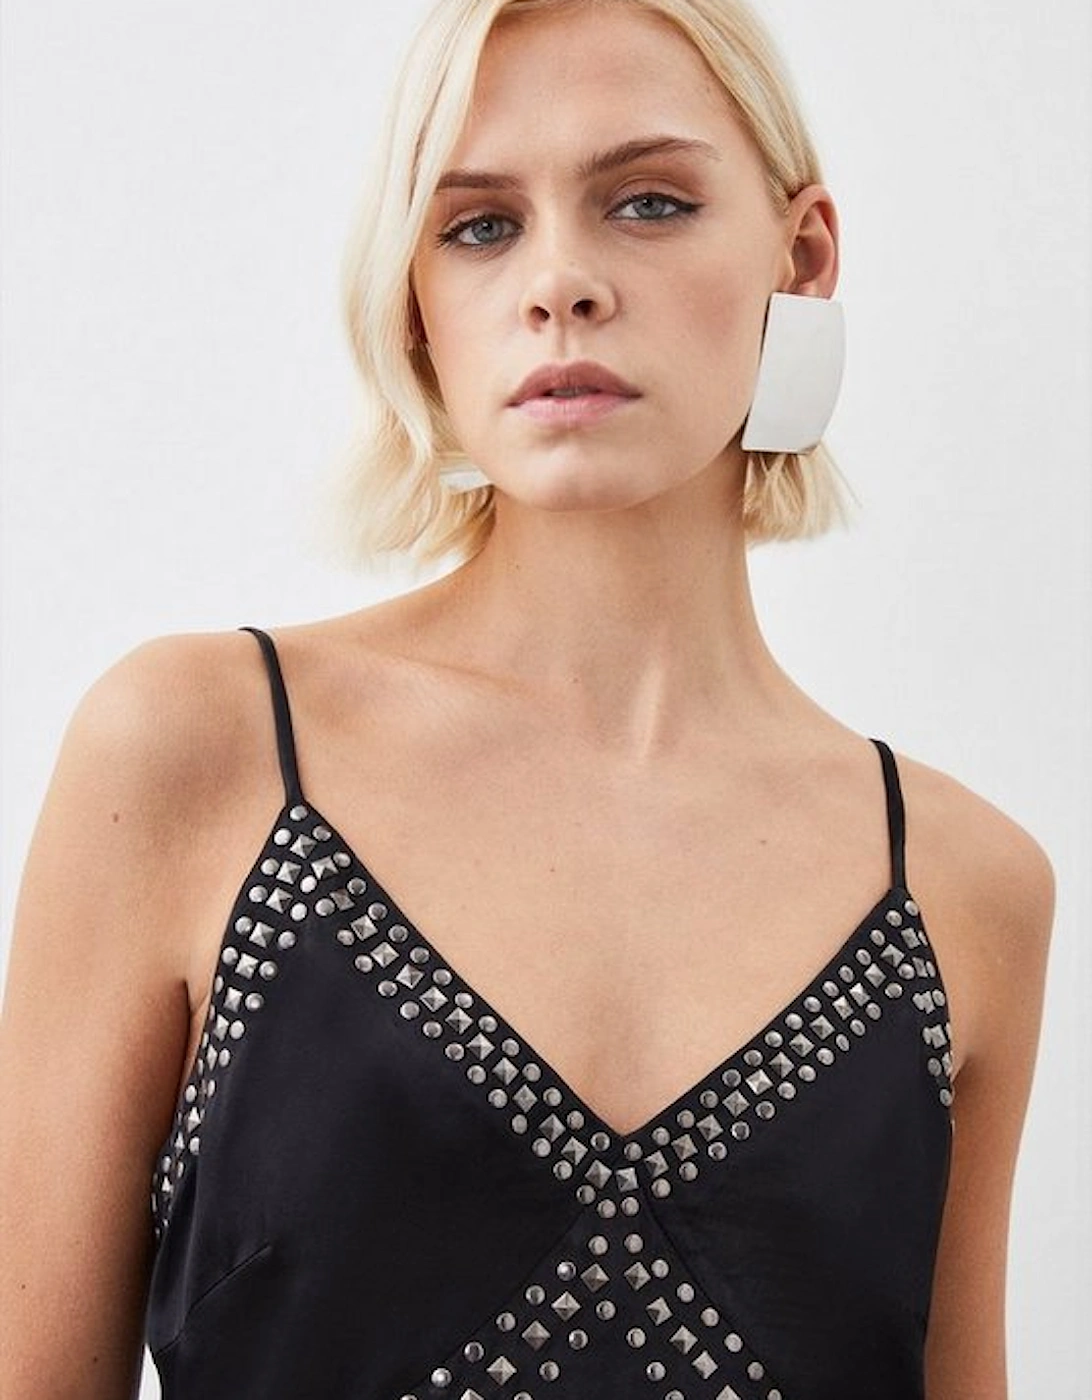 Embellished Stud Satin Woven Cami Top